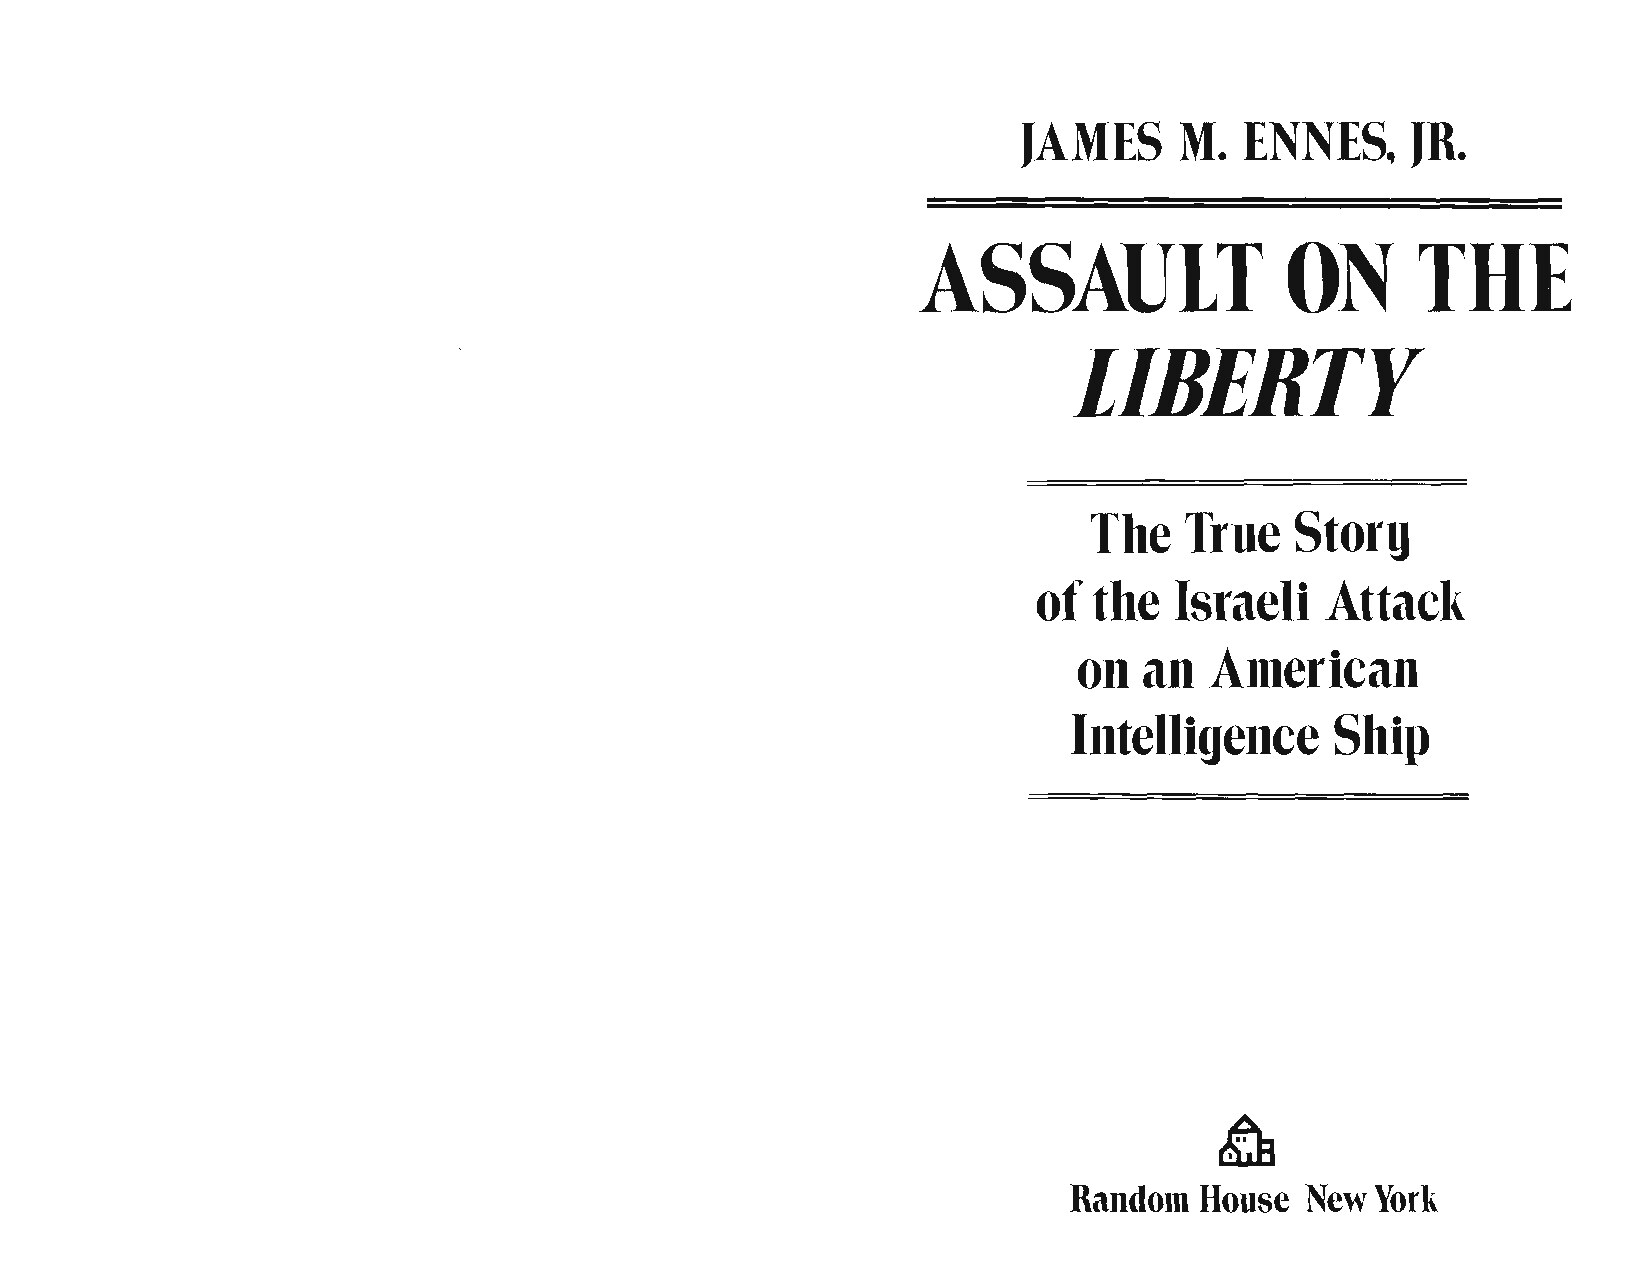 Ennes, James N.; Assault On The Liberty; The True Story of the Israeli Attack on an American Intelligence Ship